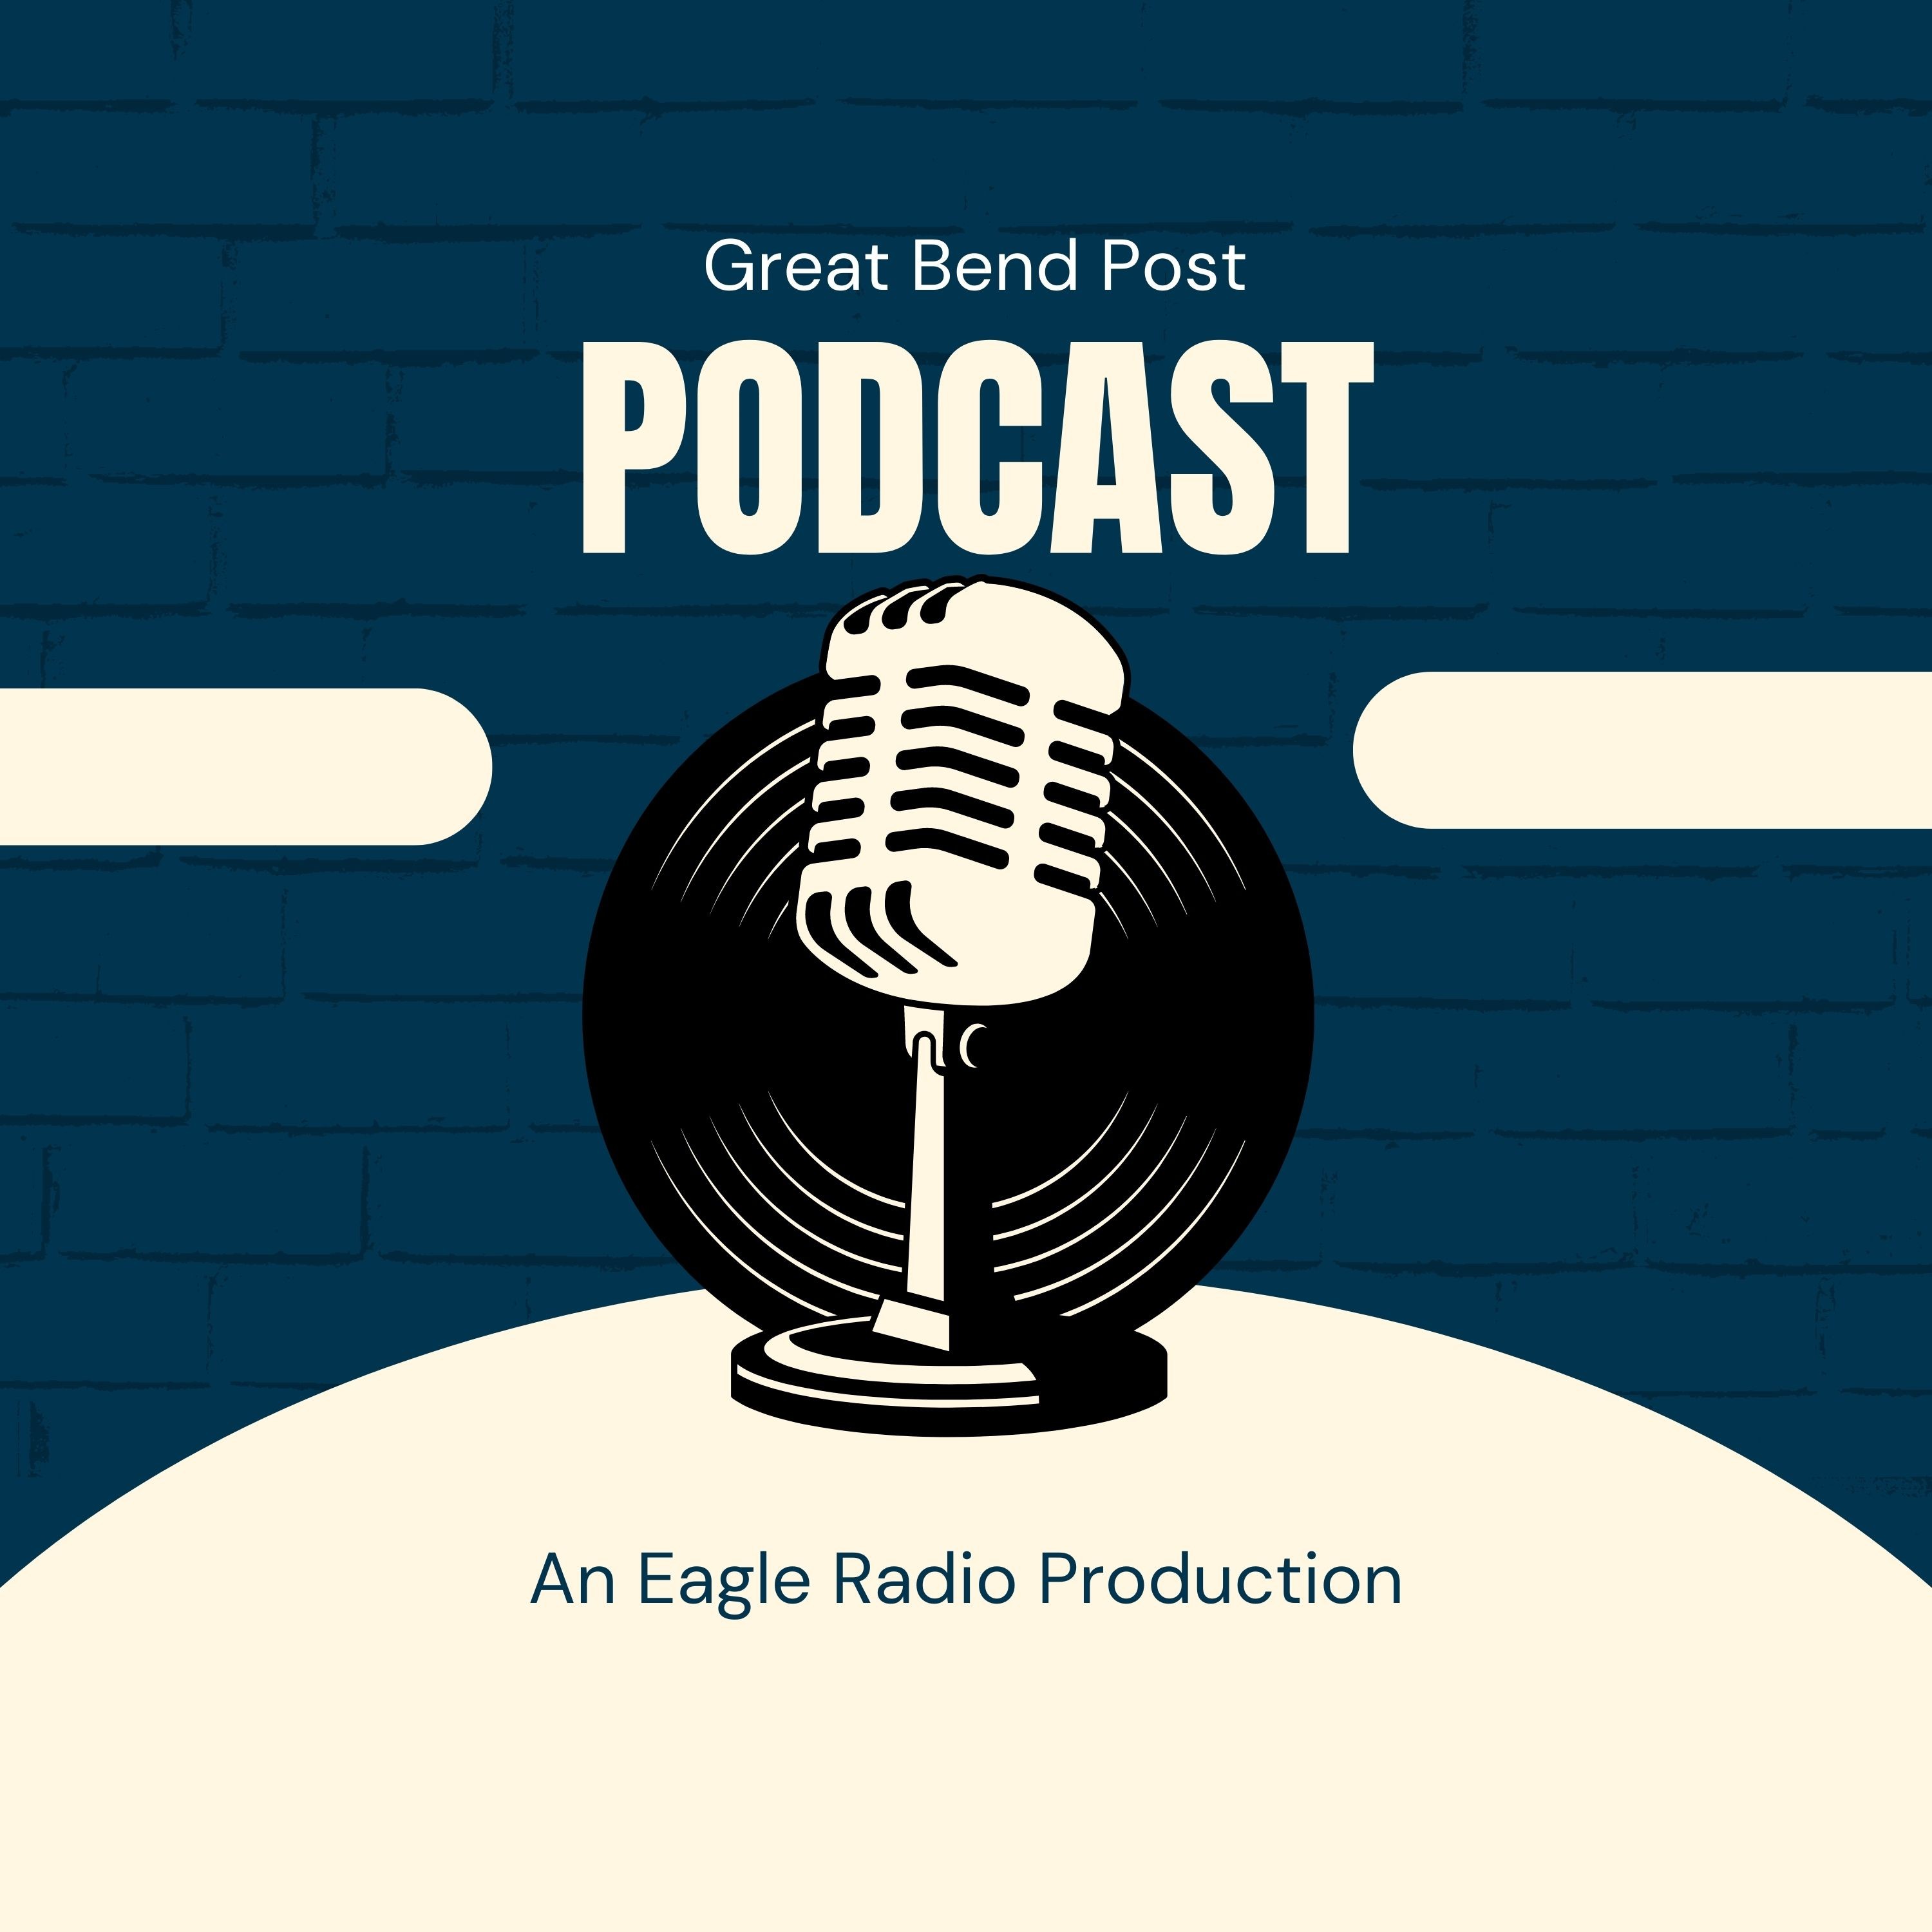 Great Bend Post Podcast